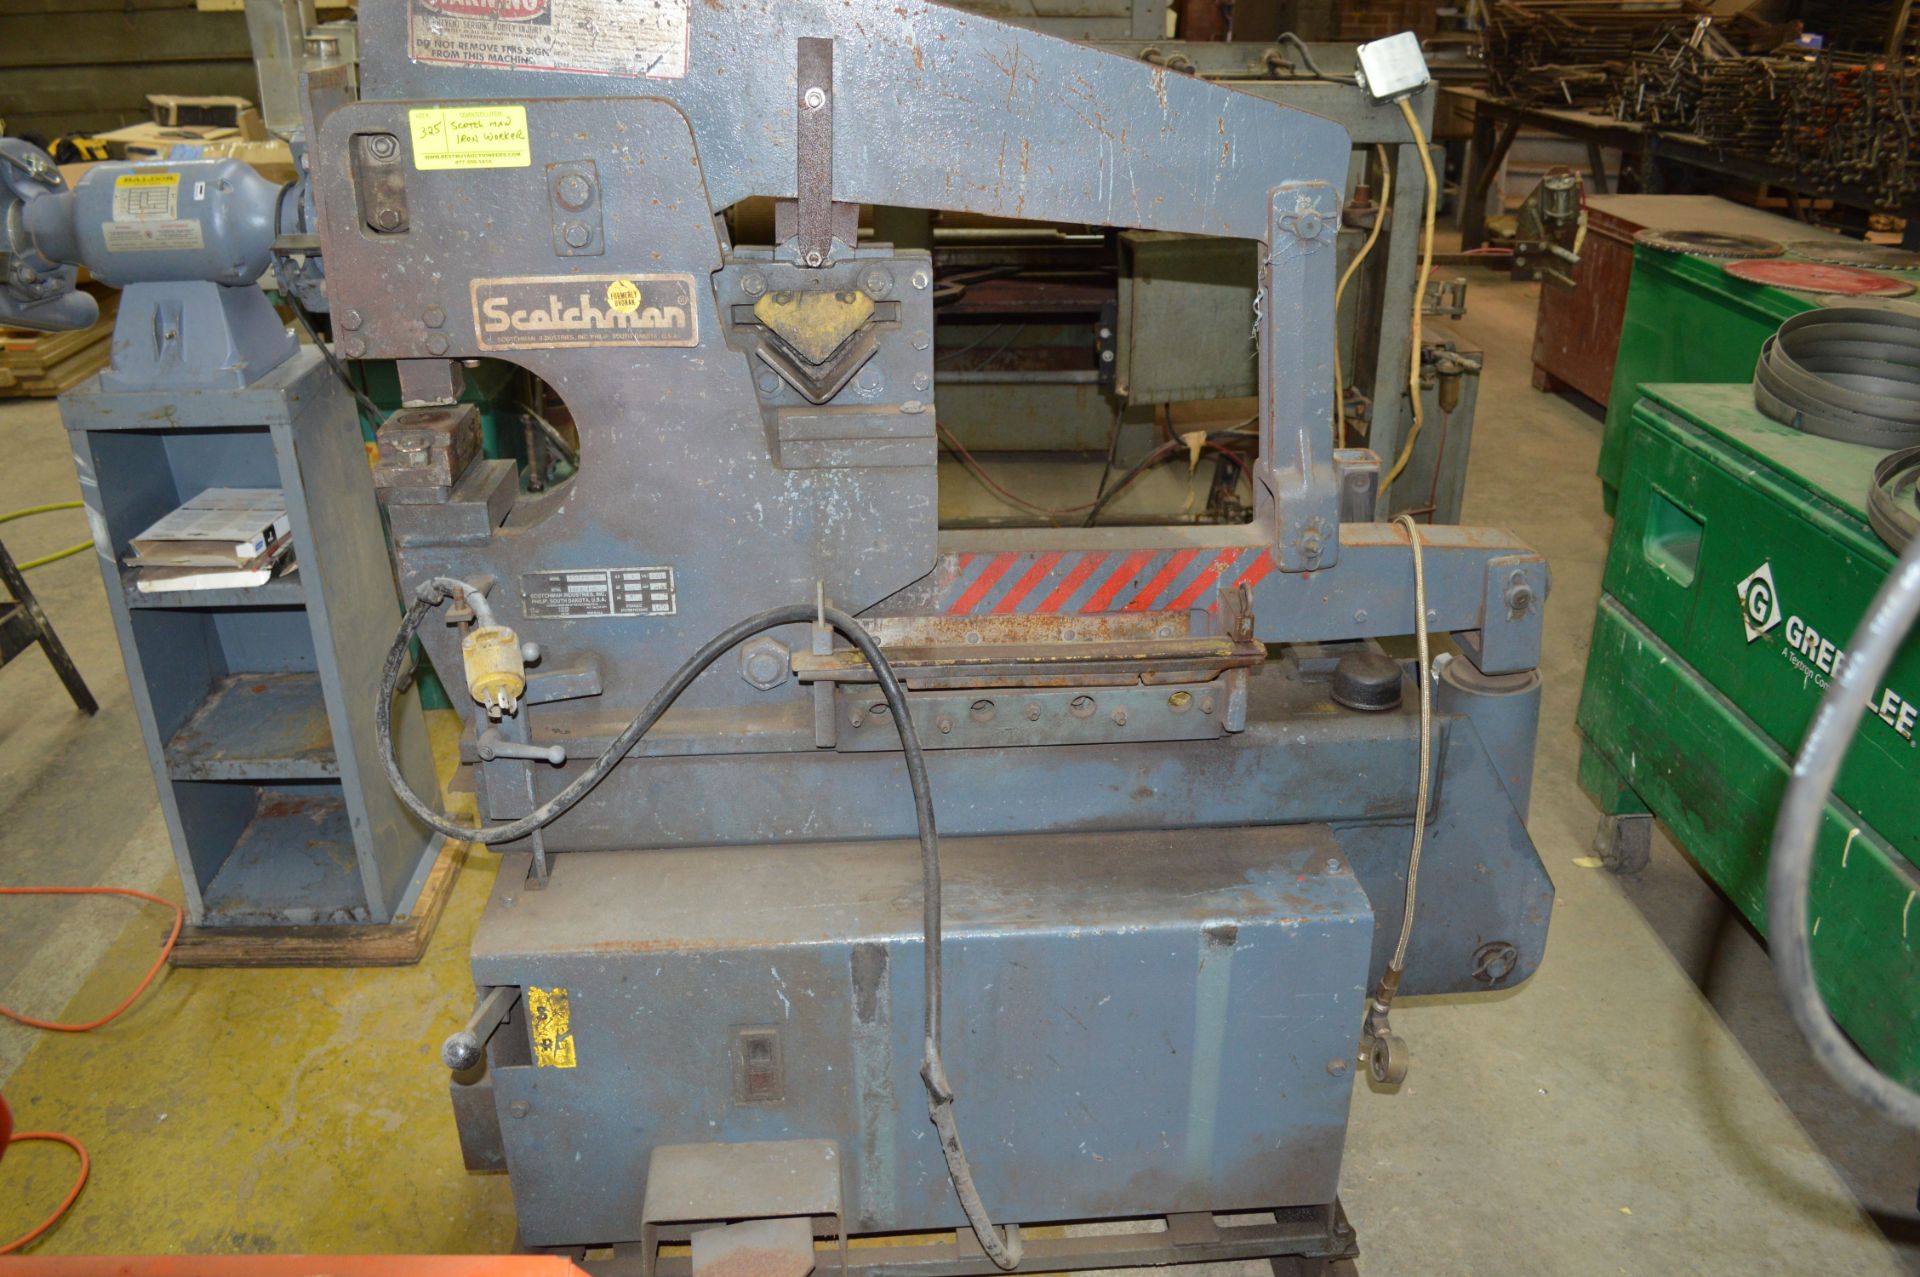 SCOTCHMAN IRON WORKER PUNCH/CUTTER MODEL 4014C OB - Image 2 of 5